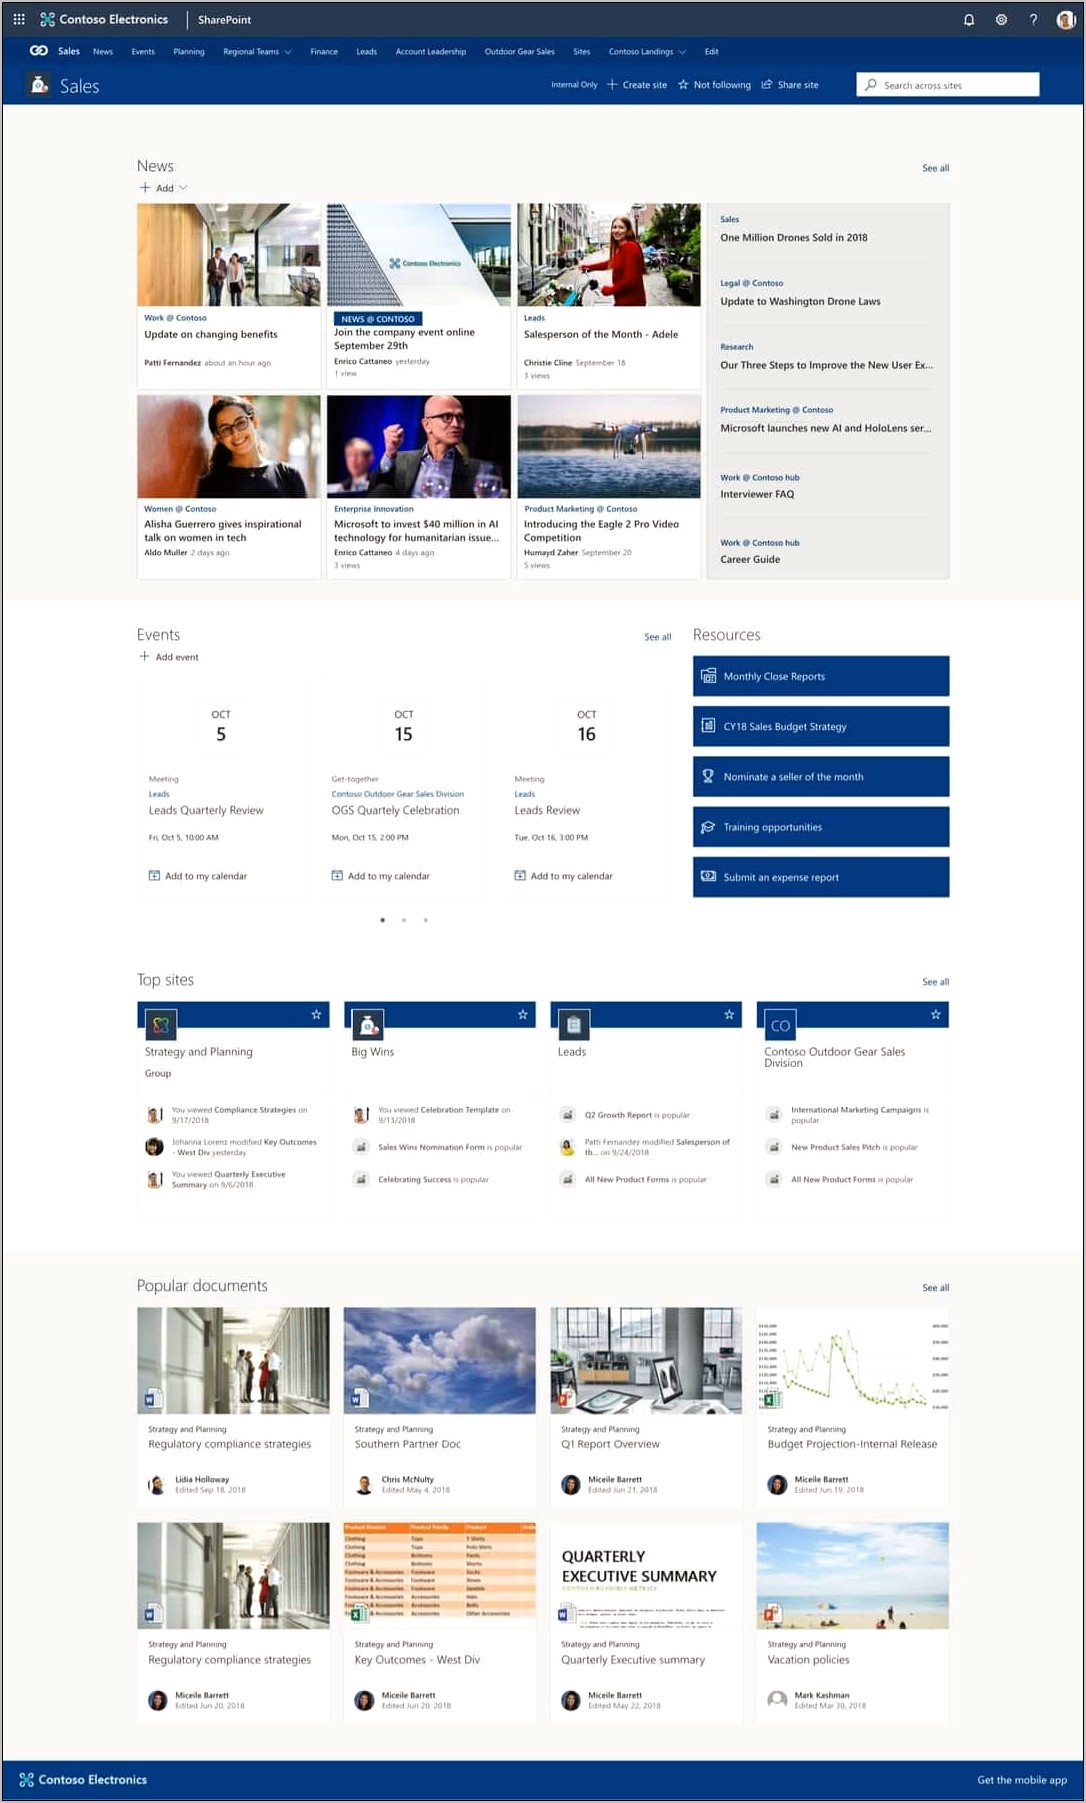 Free Office 365 Sharepoint Intranet Templates